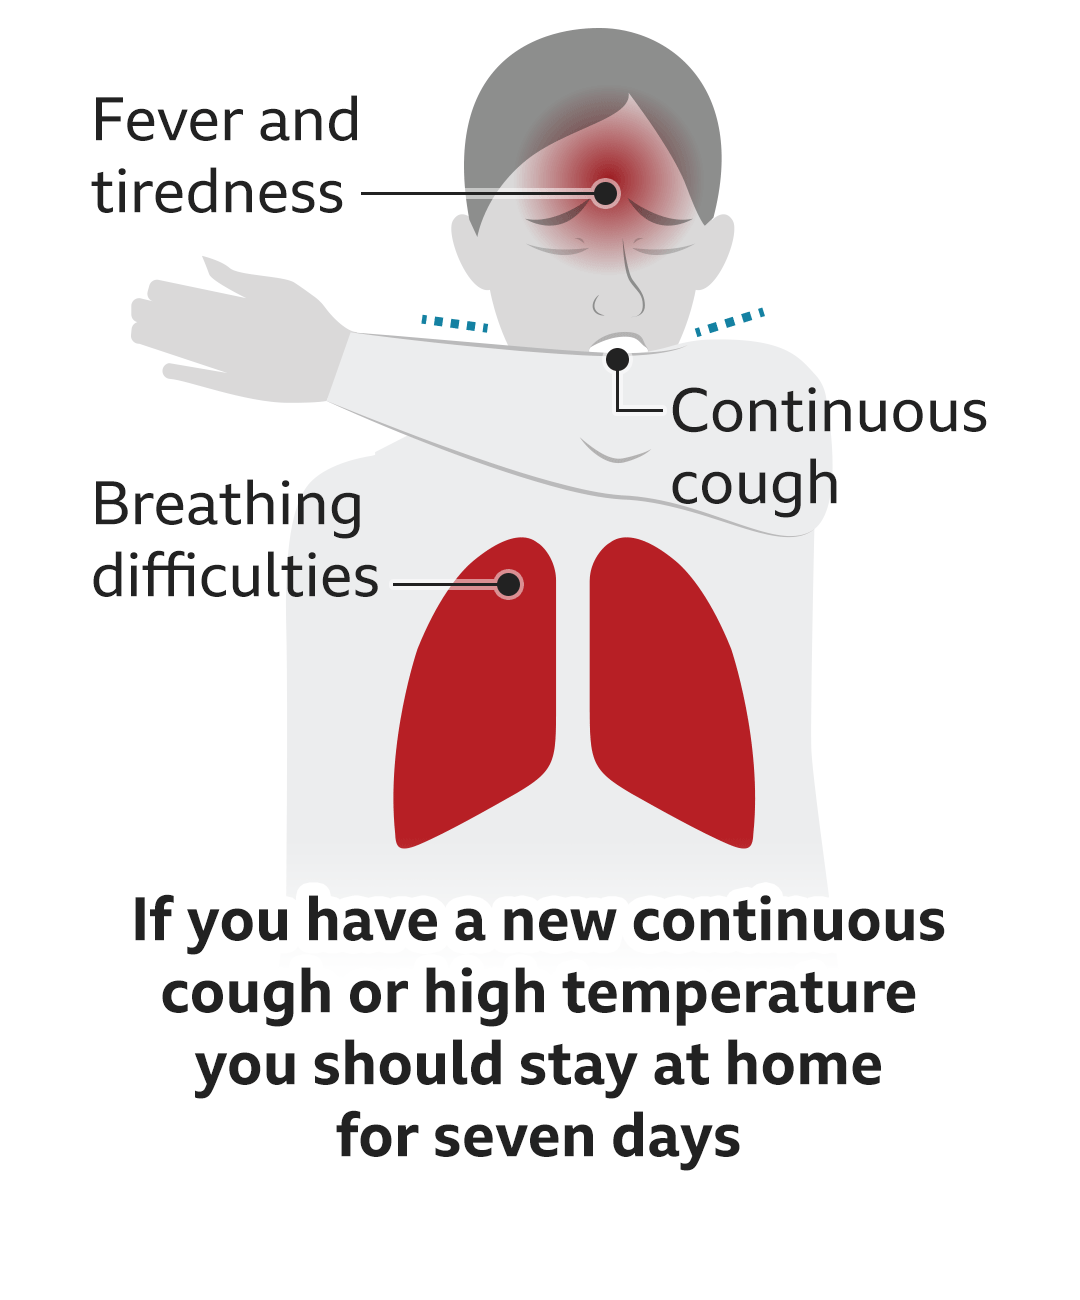 Text reads: If you have a continuous cough or high temperature, you should stay at home for seven days